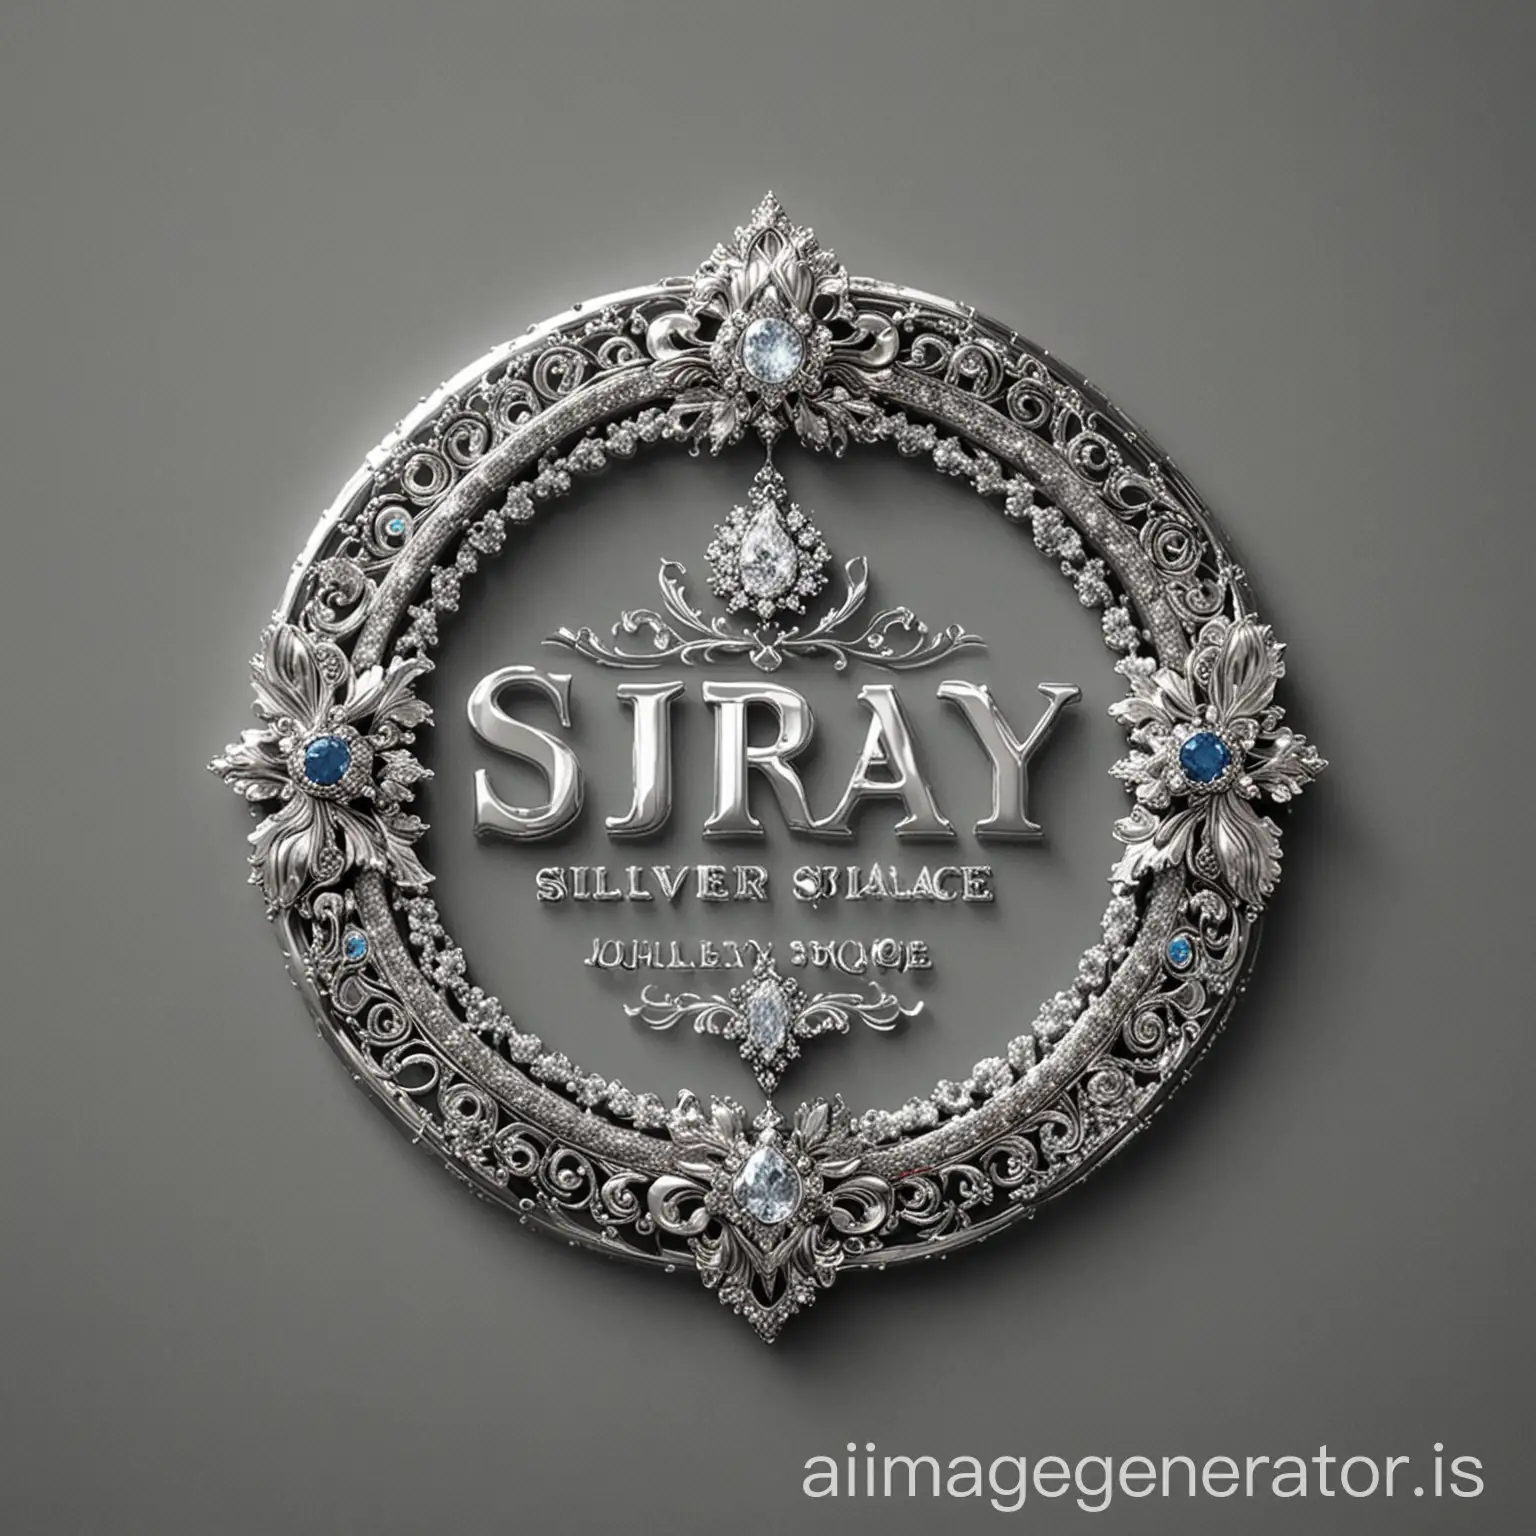 i want you to make me a logo for a silver jewellery shop that im going to open. its name is Surya Silver Palace. now make me some logos with this name and appropriate additions